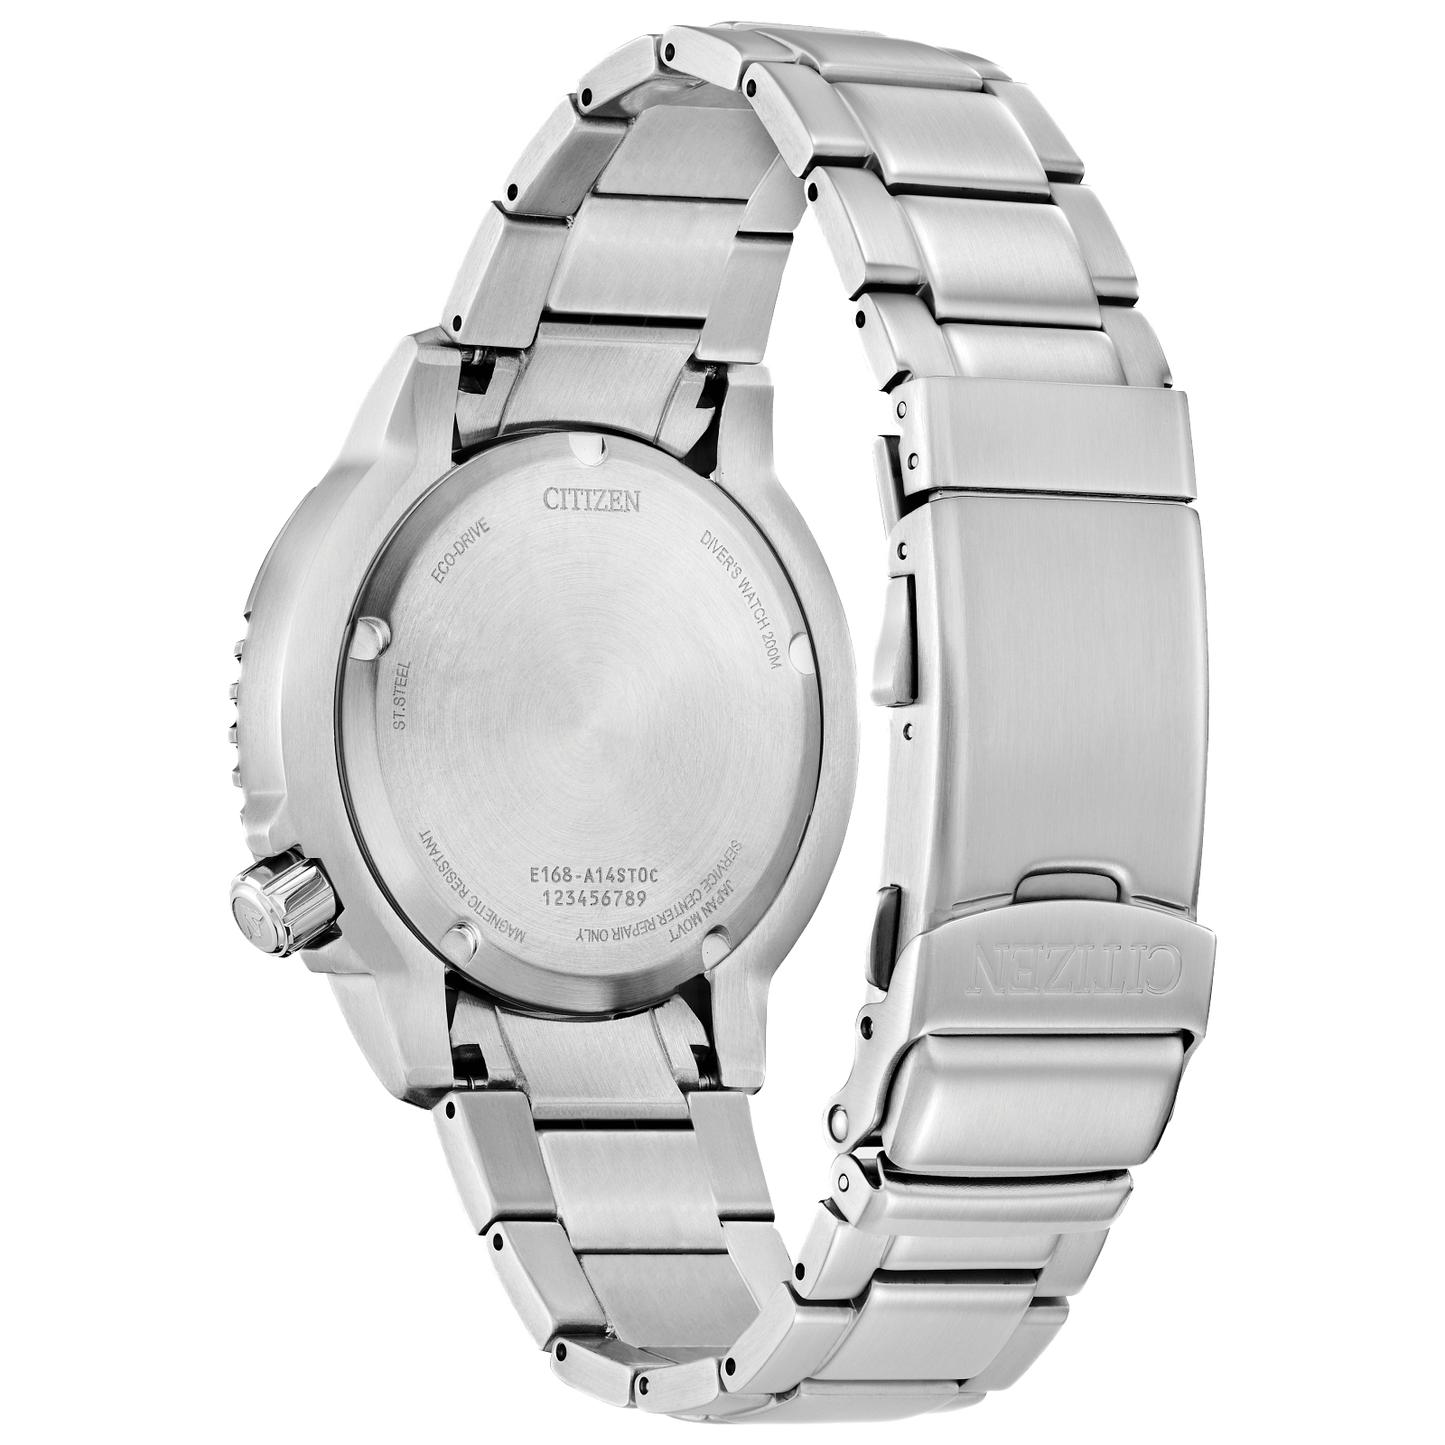 Promaster Dive Stainless Steel Watch BN0167-50H